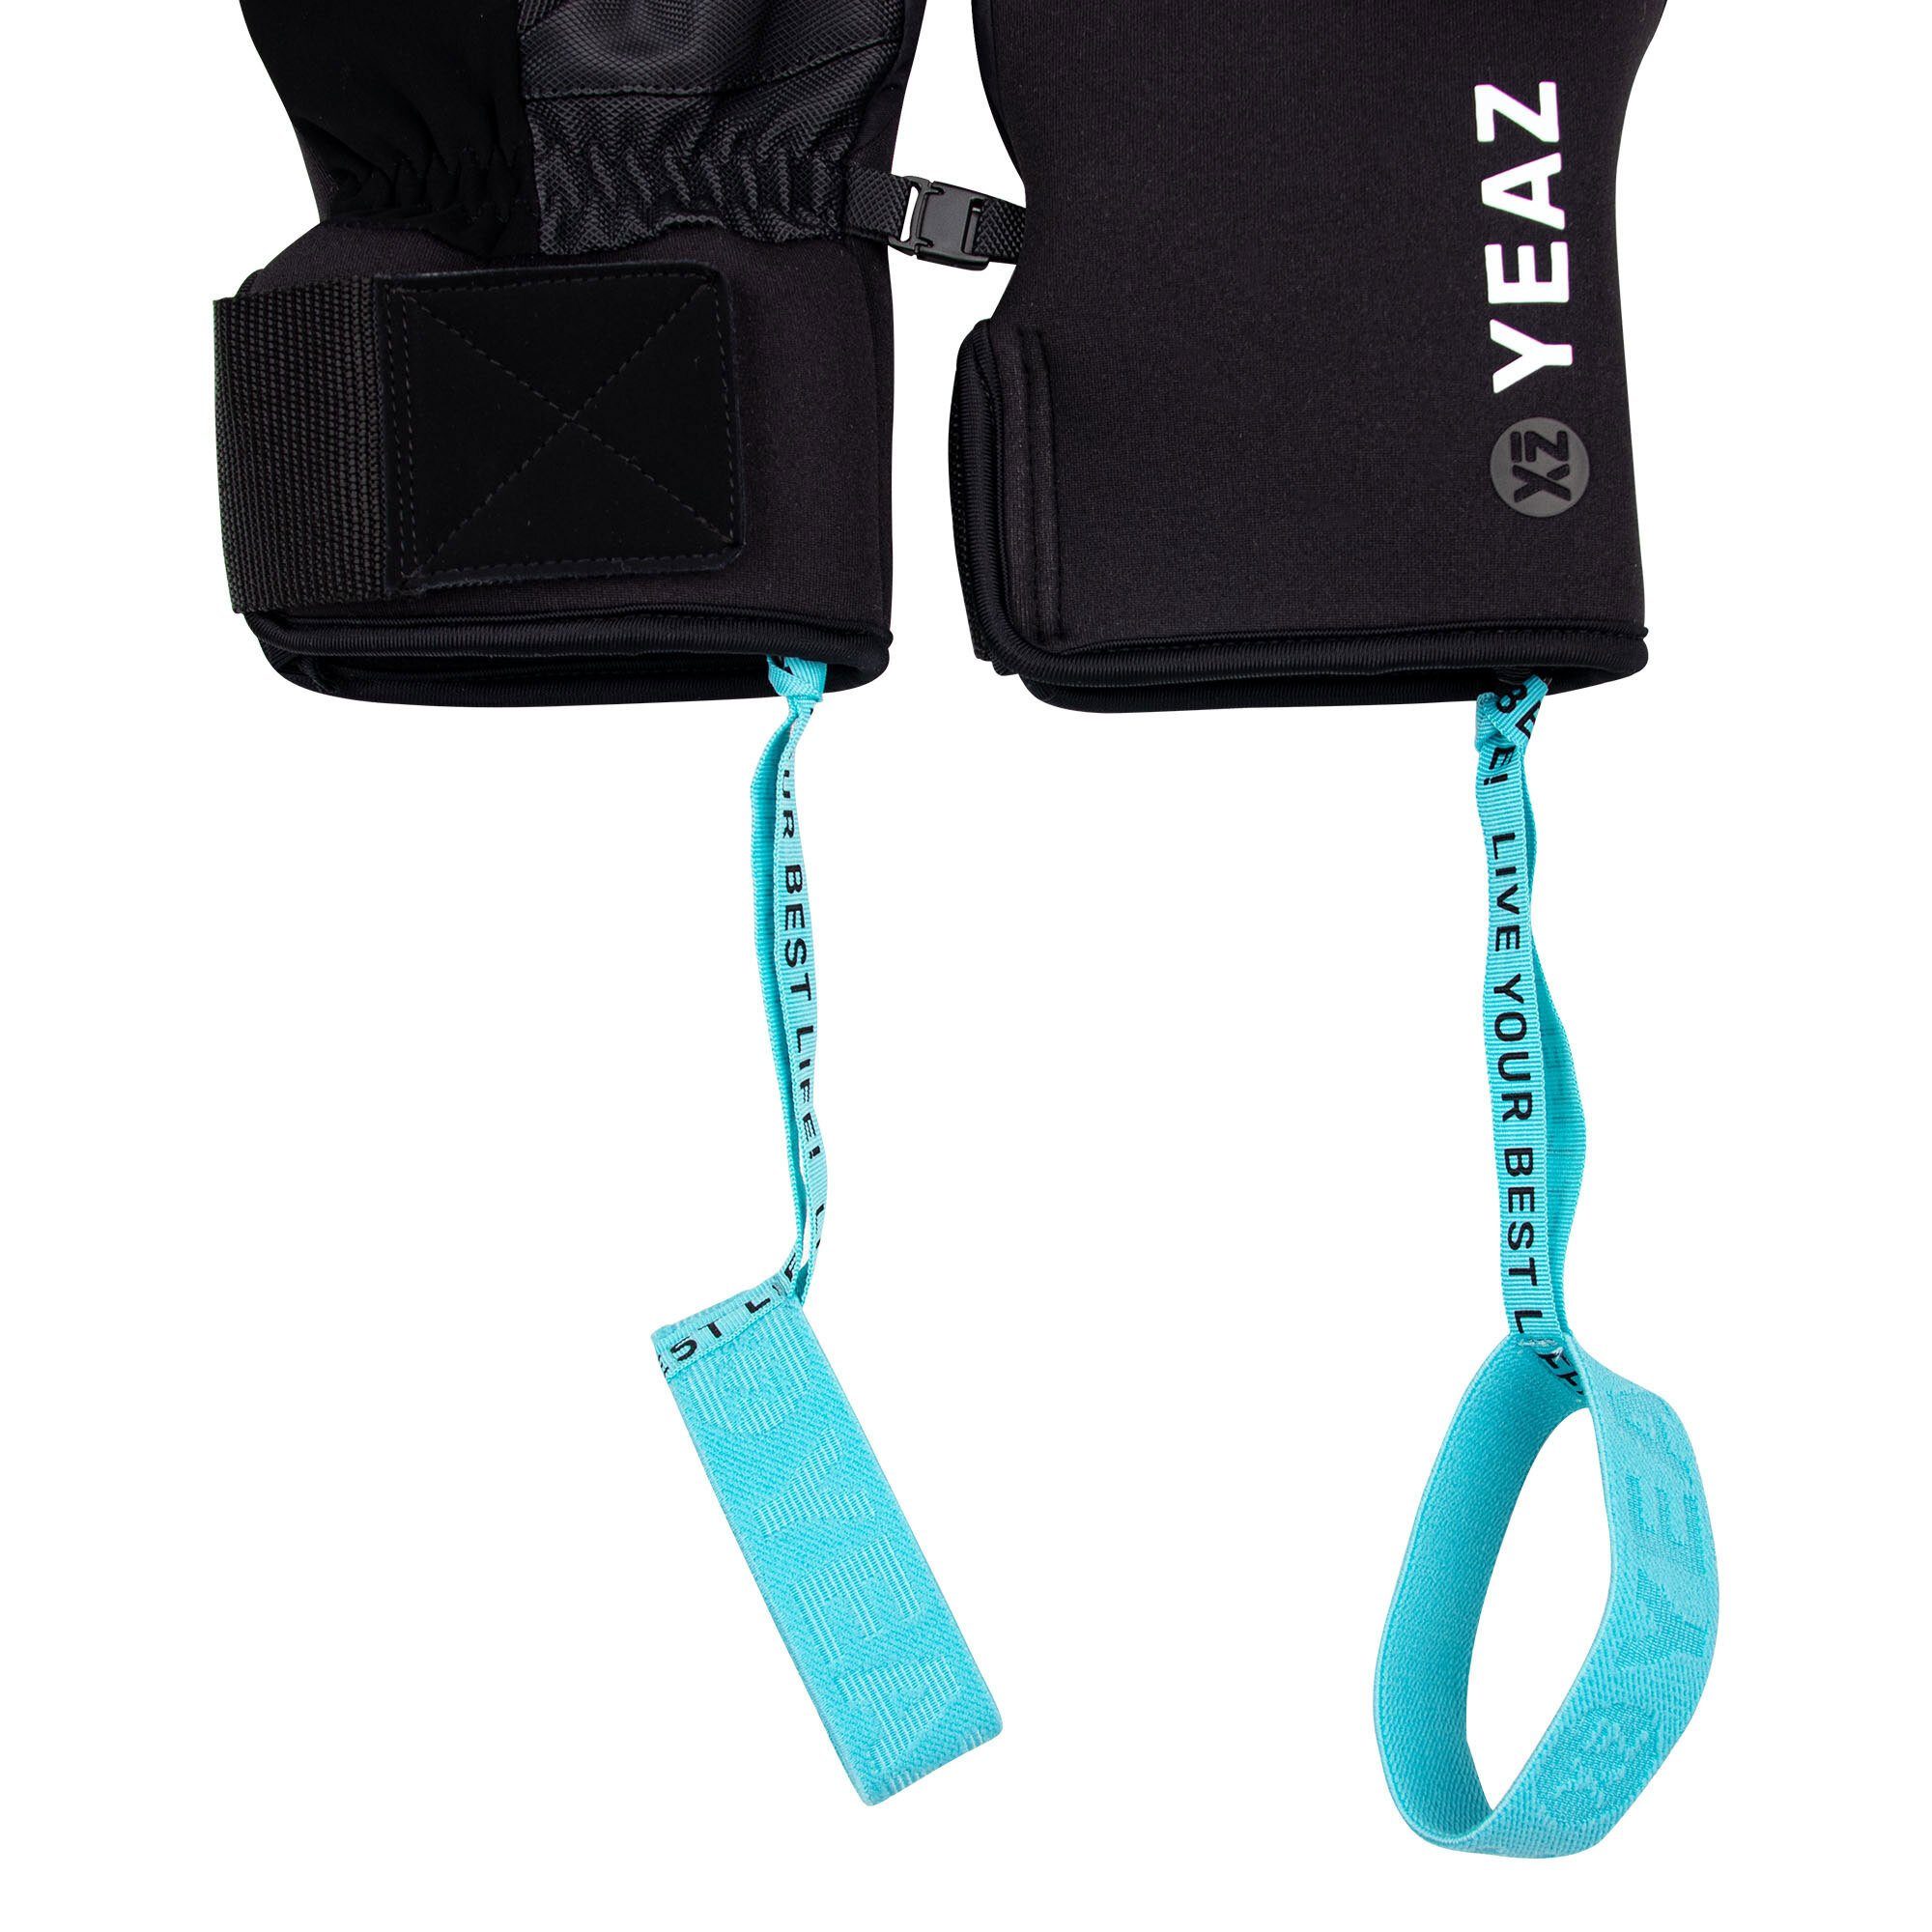 YEAZ Skihandschuhe POW fausthandschuhe Touch-Funktion Wrist-Band &